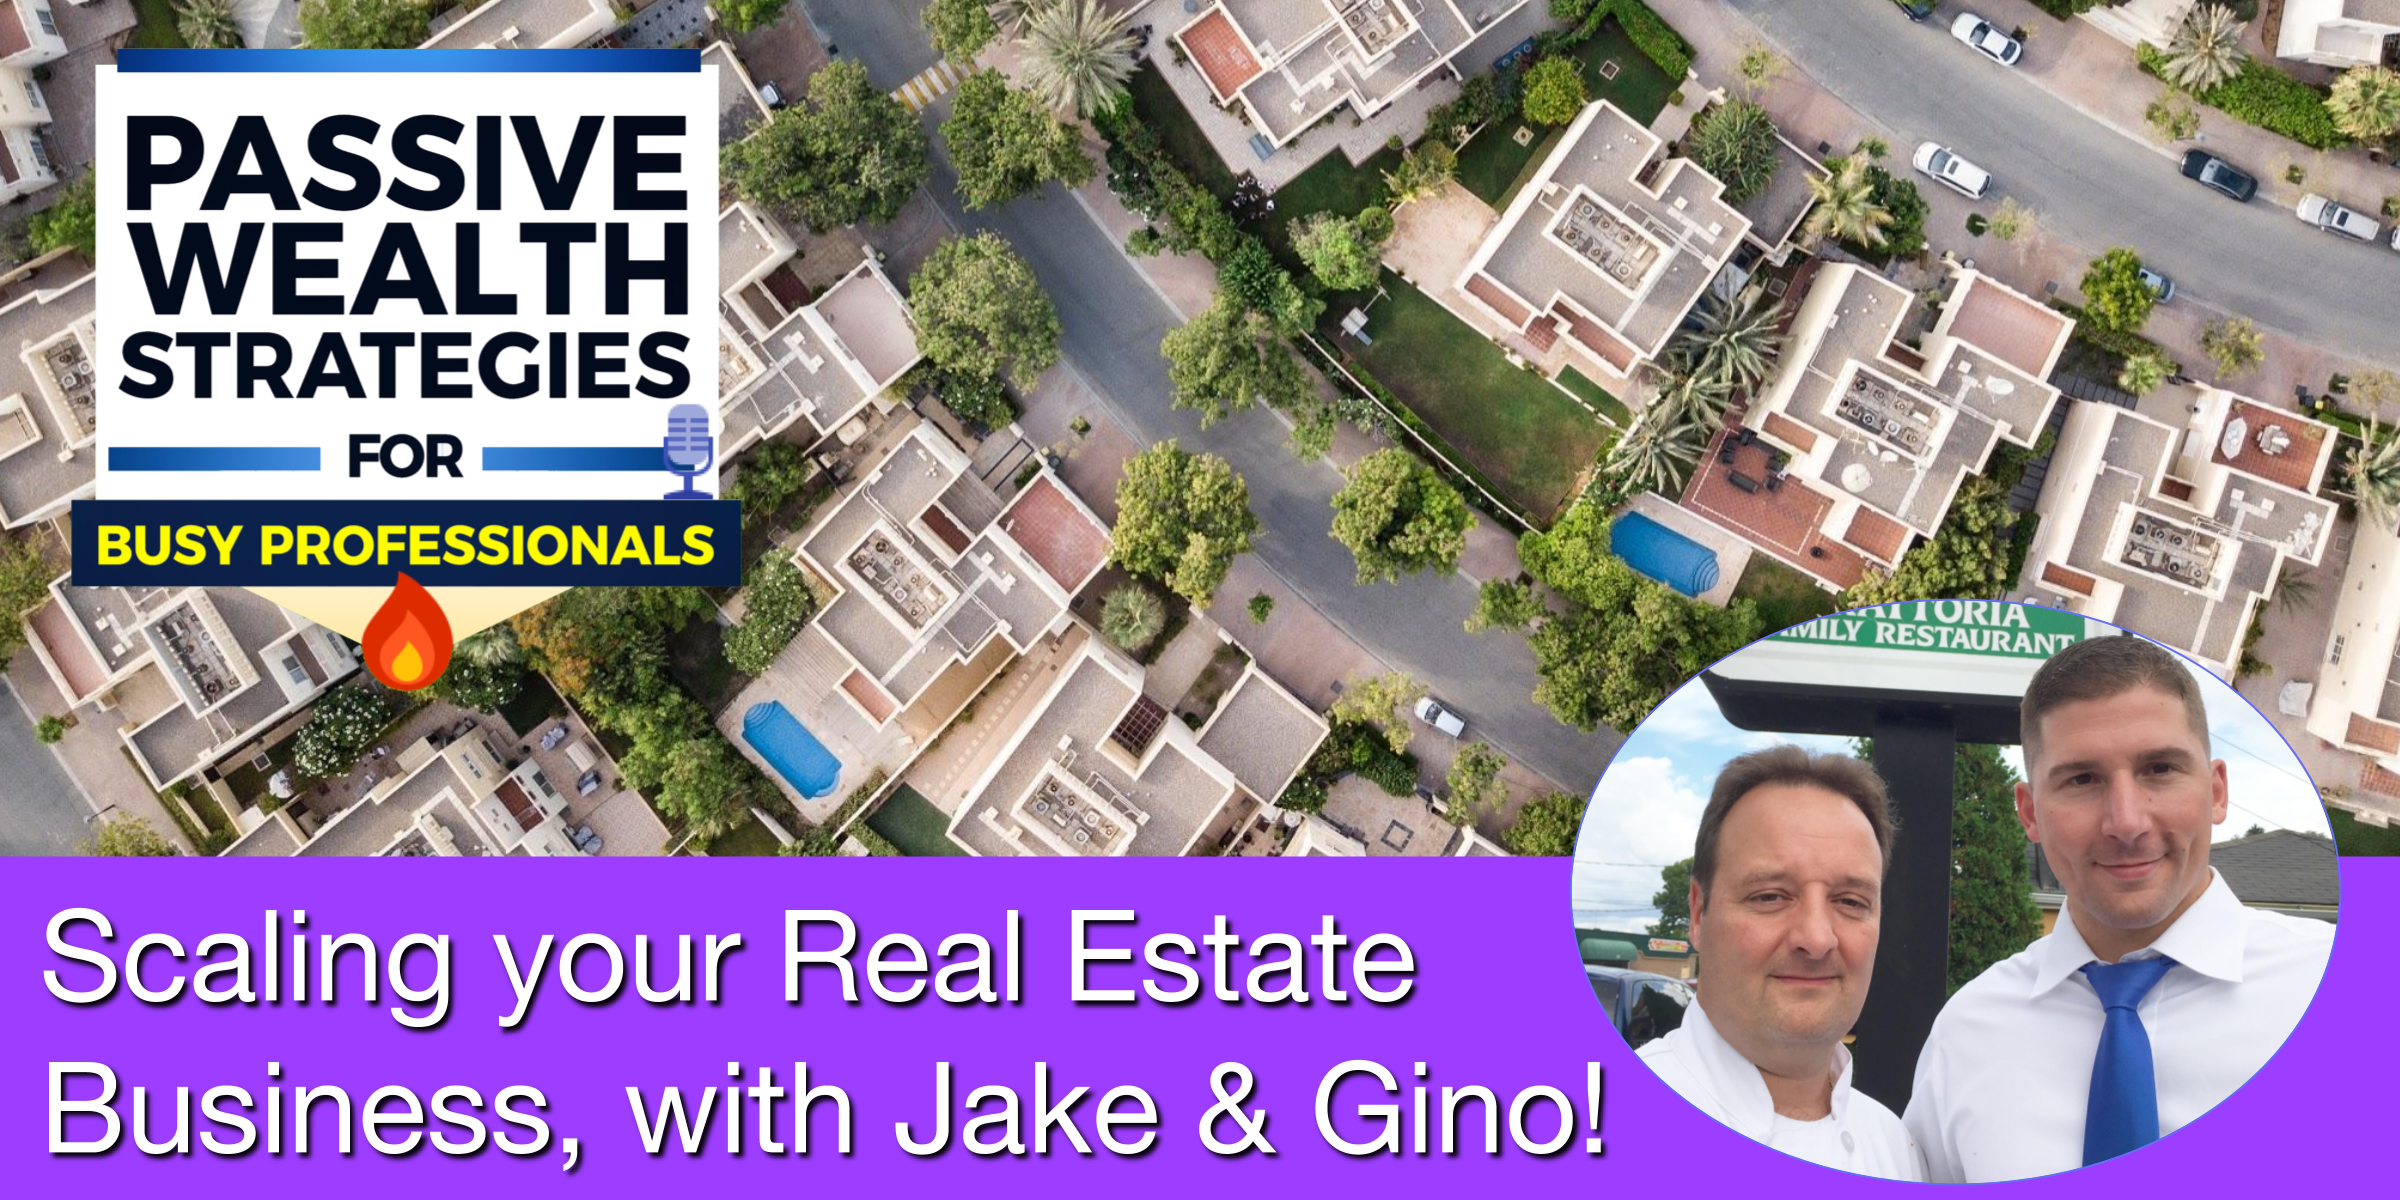 Scaling your Real Estate Business, with Jake & Gino!